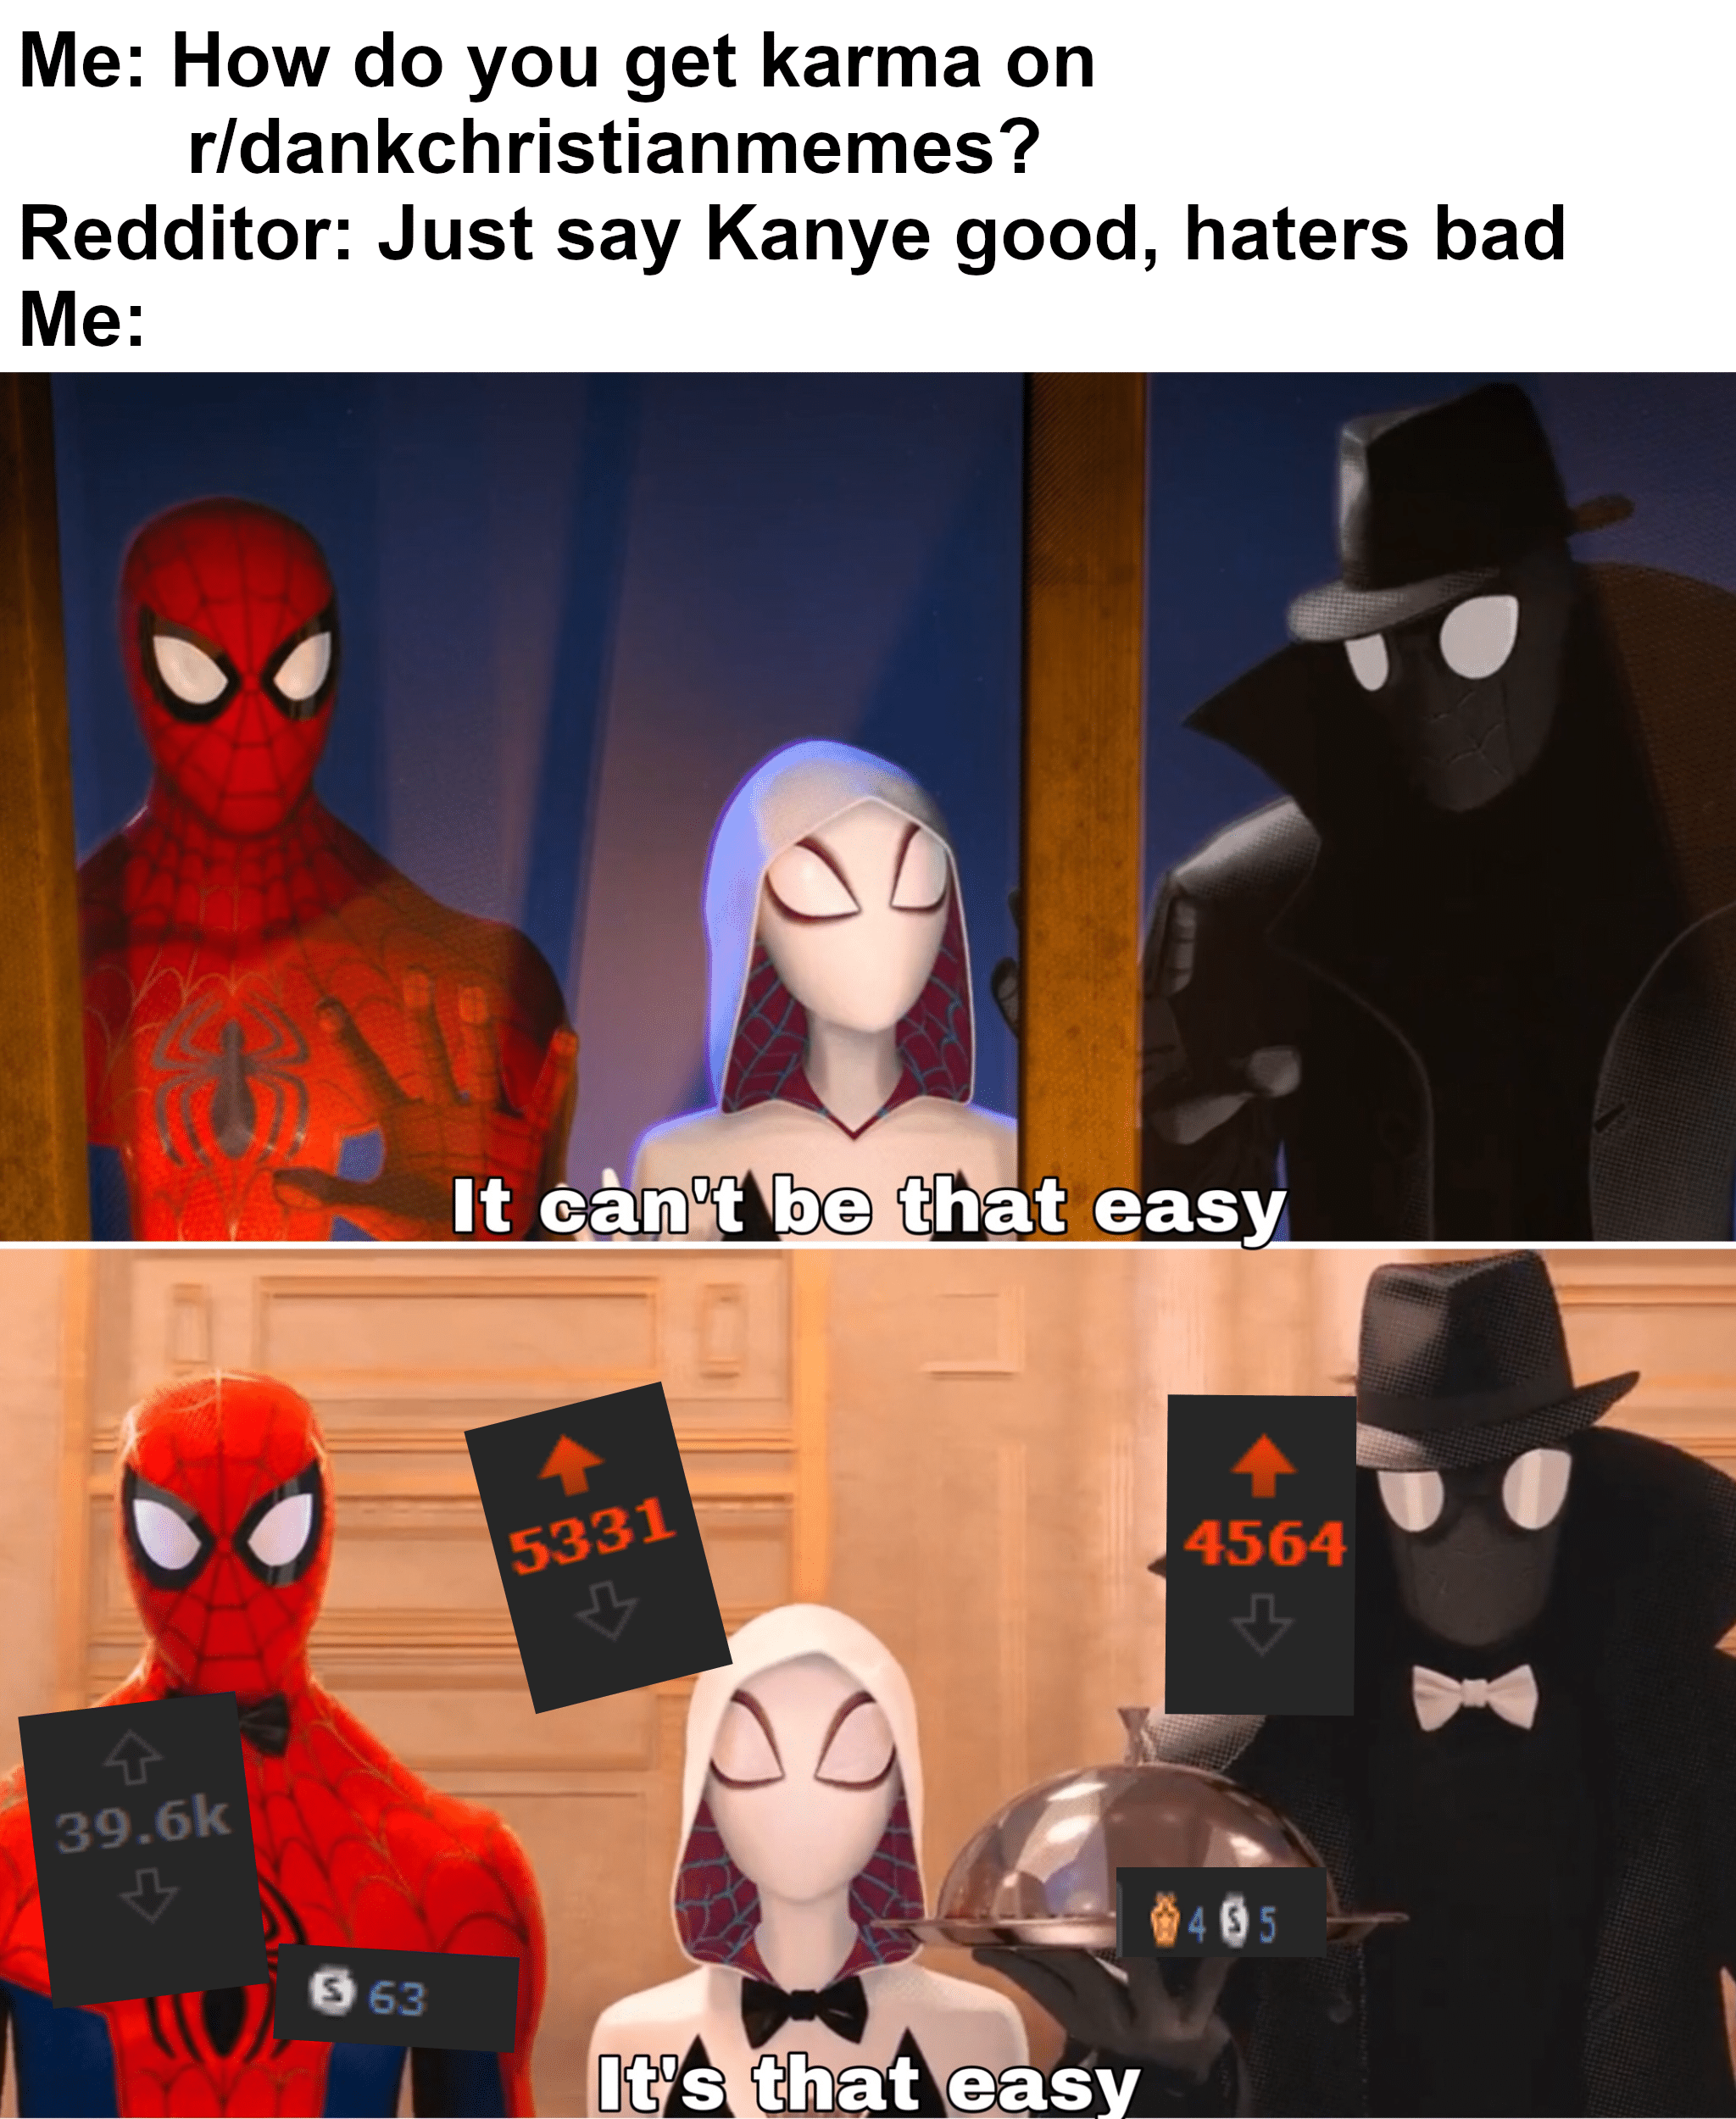 christian christian-memes christian text: Me: How do you get karma on r/dankchristianmemes? Redditor: Just say Kanye good, haters bad It qåQ't be that easy 5331 39.6k It's that easy 4564 